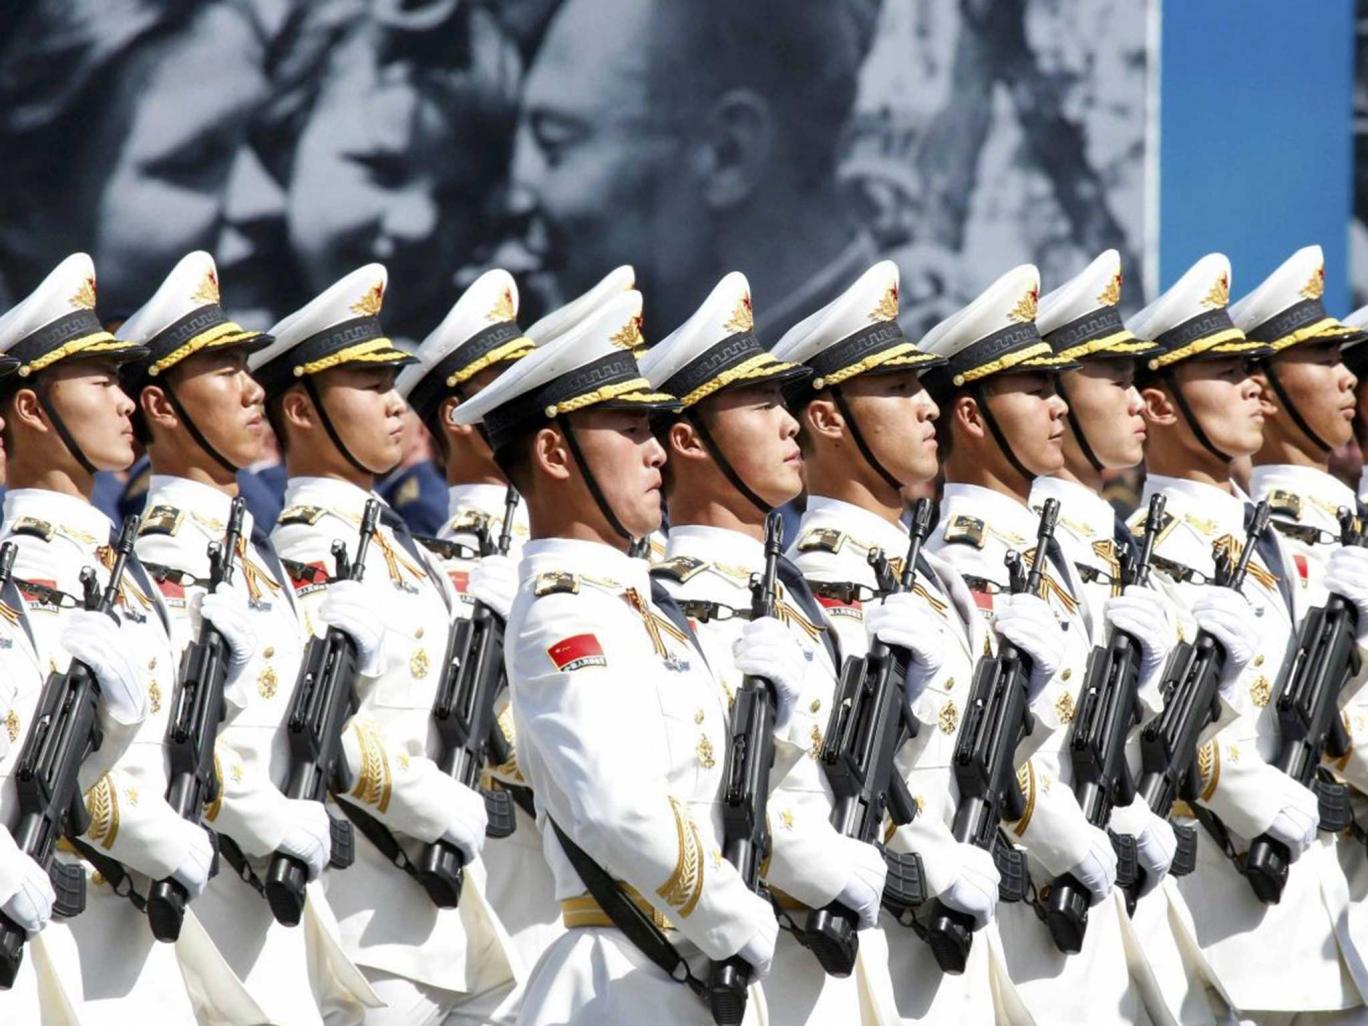 pla soldiers on parade in china photo reuters